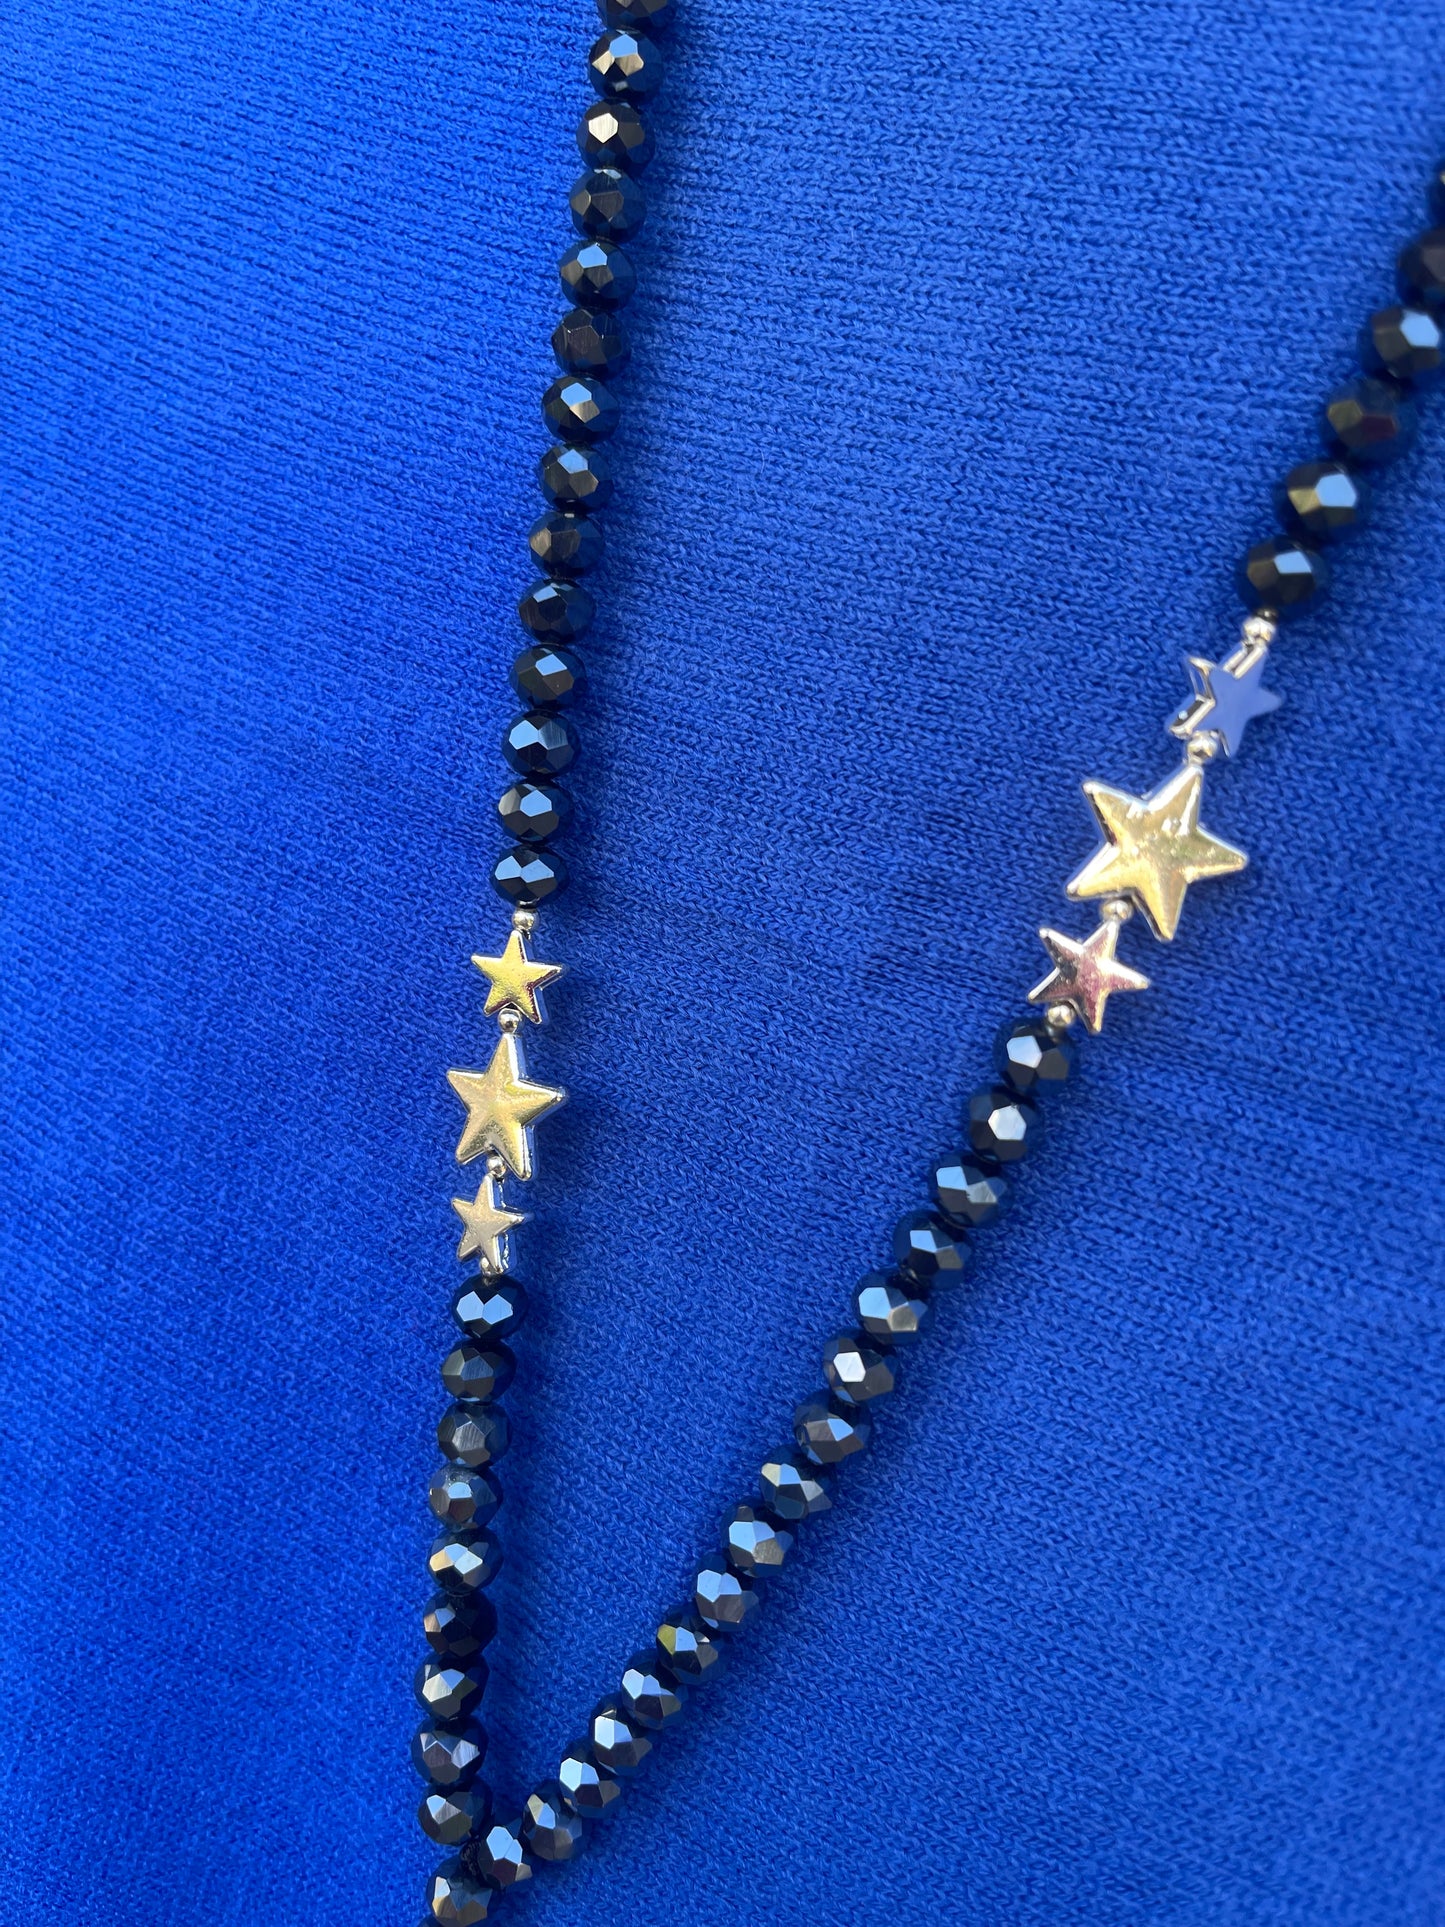 Large Navy Star Necklace